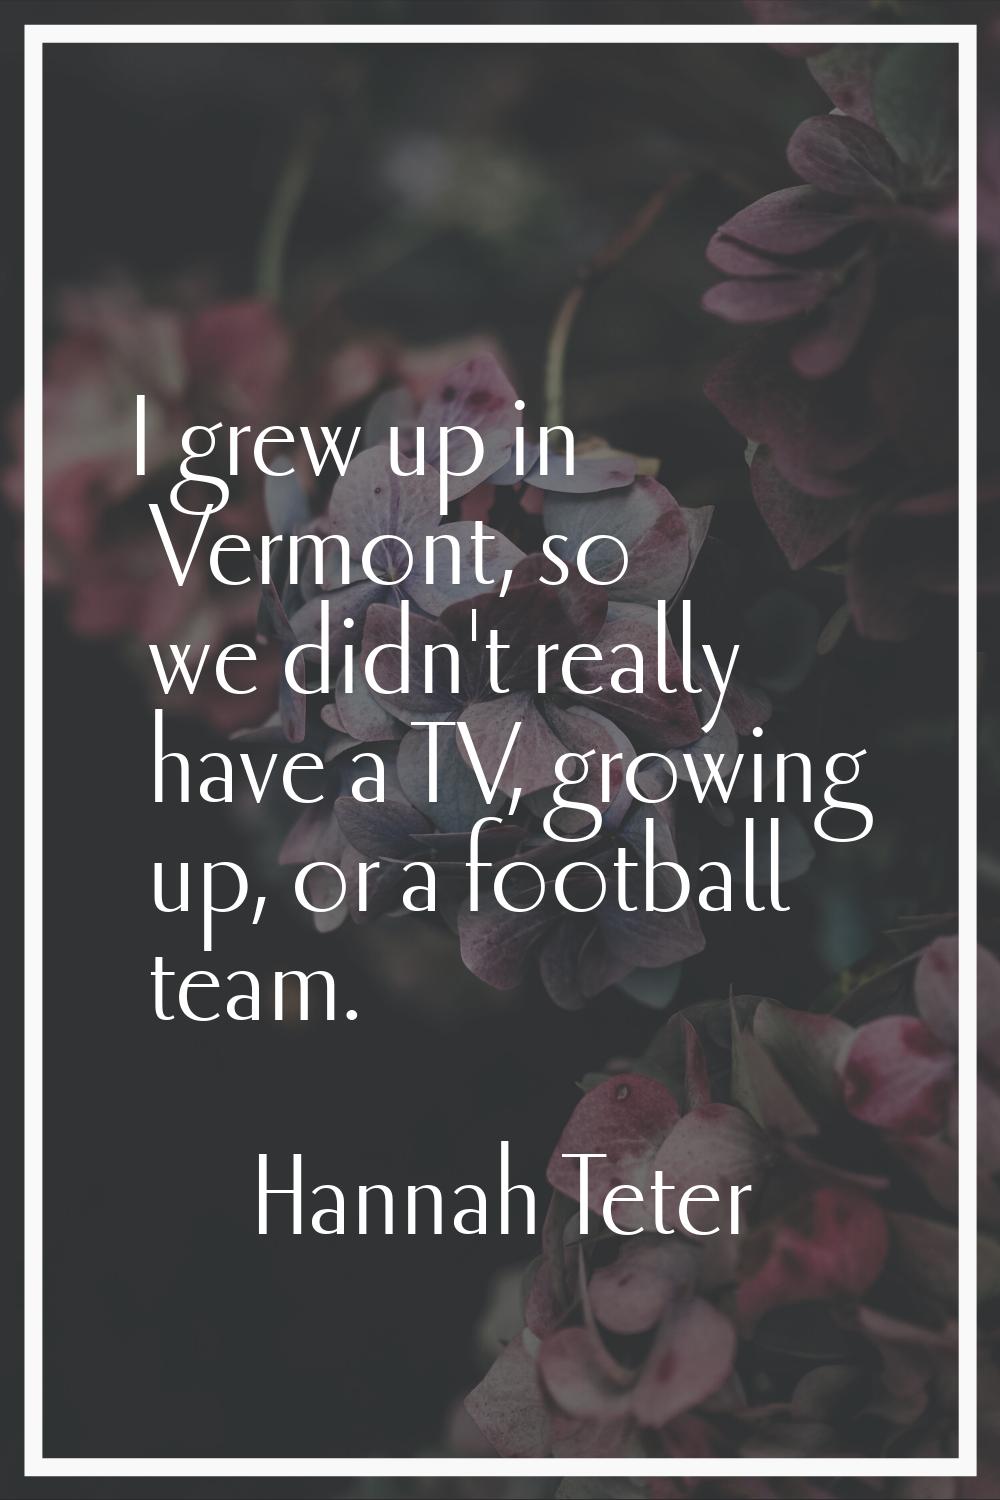 I grew up in Vermont, so we didn't really have a TV, growing up, or a football team.